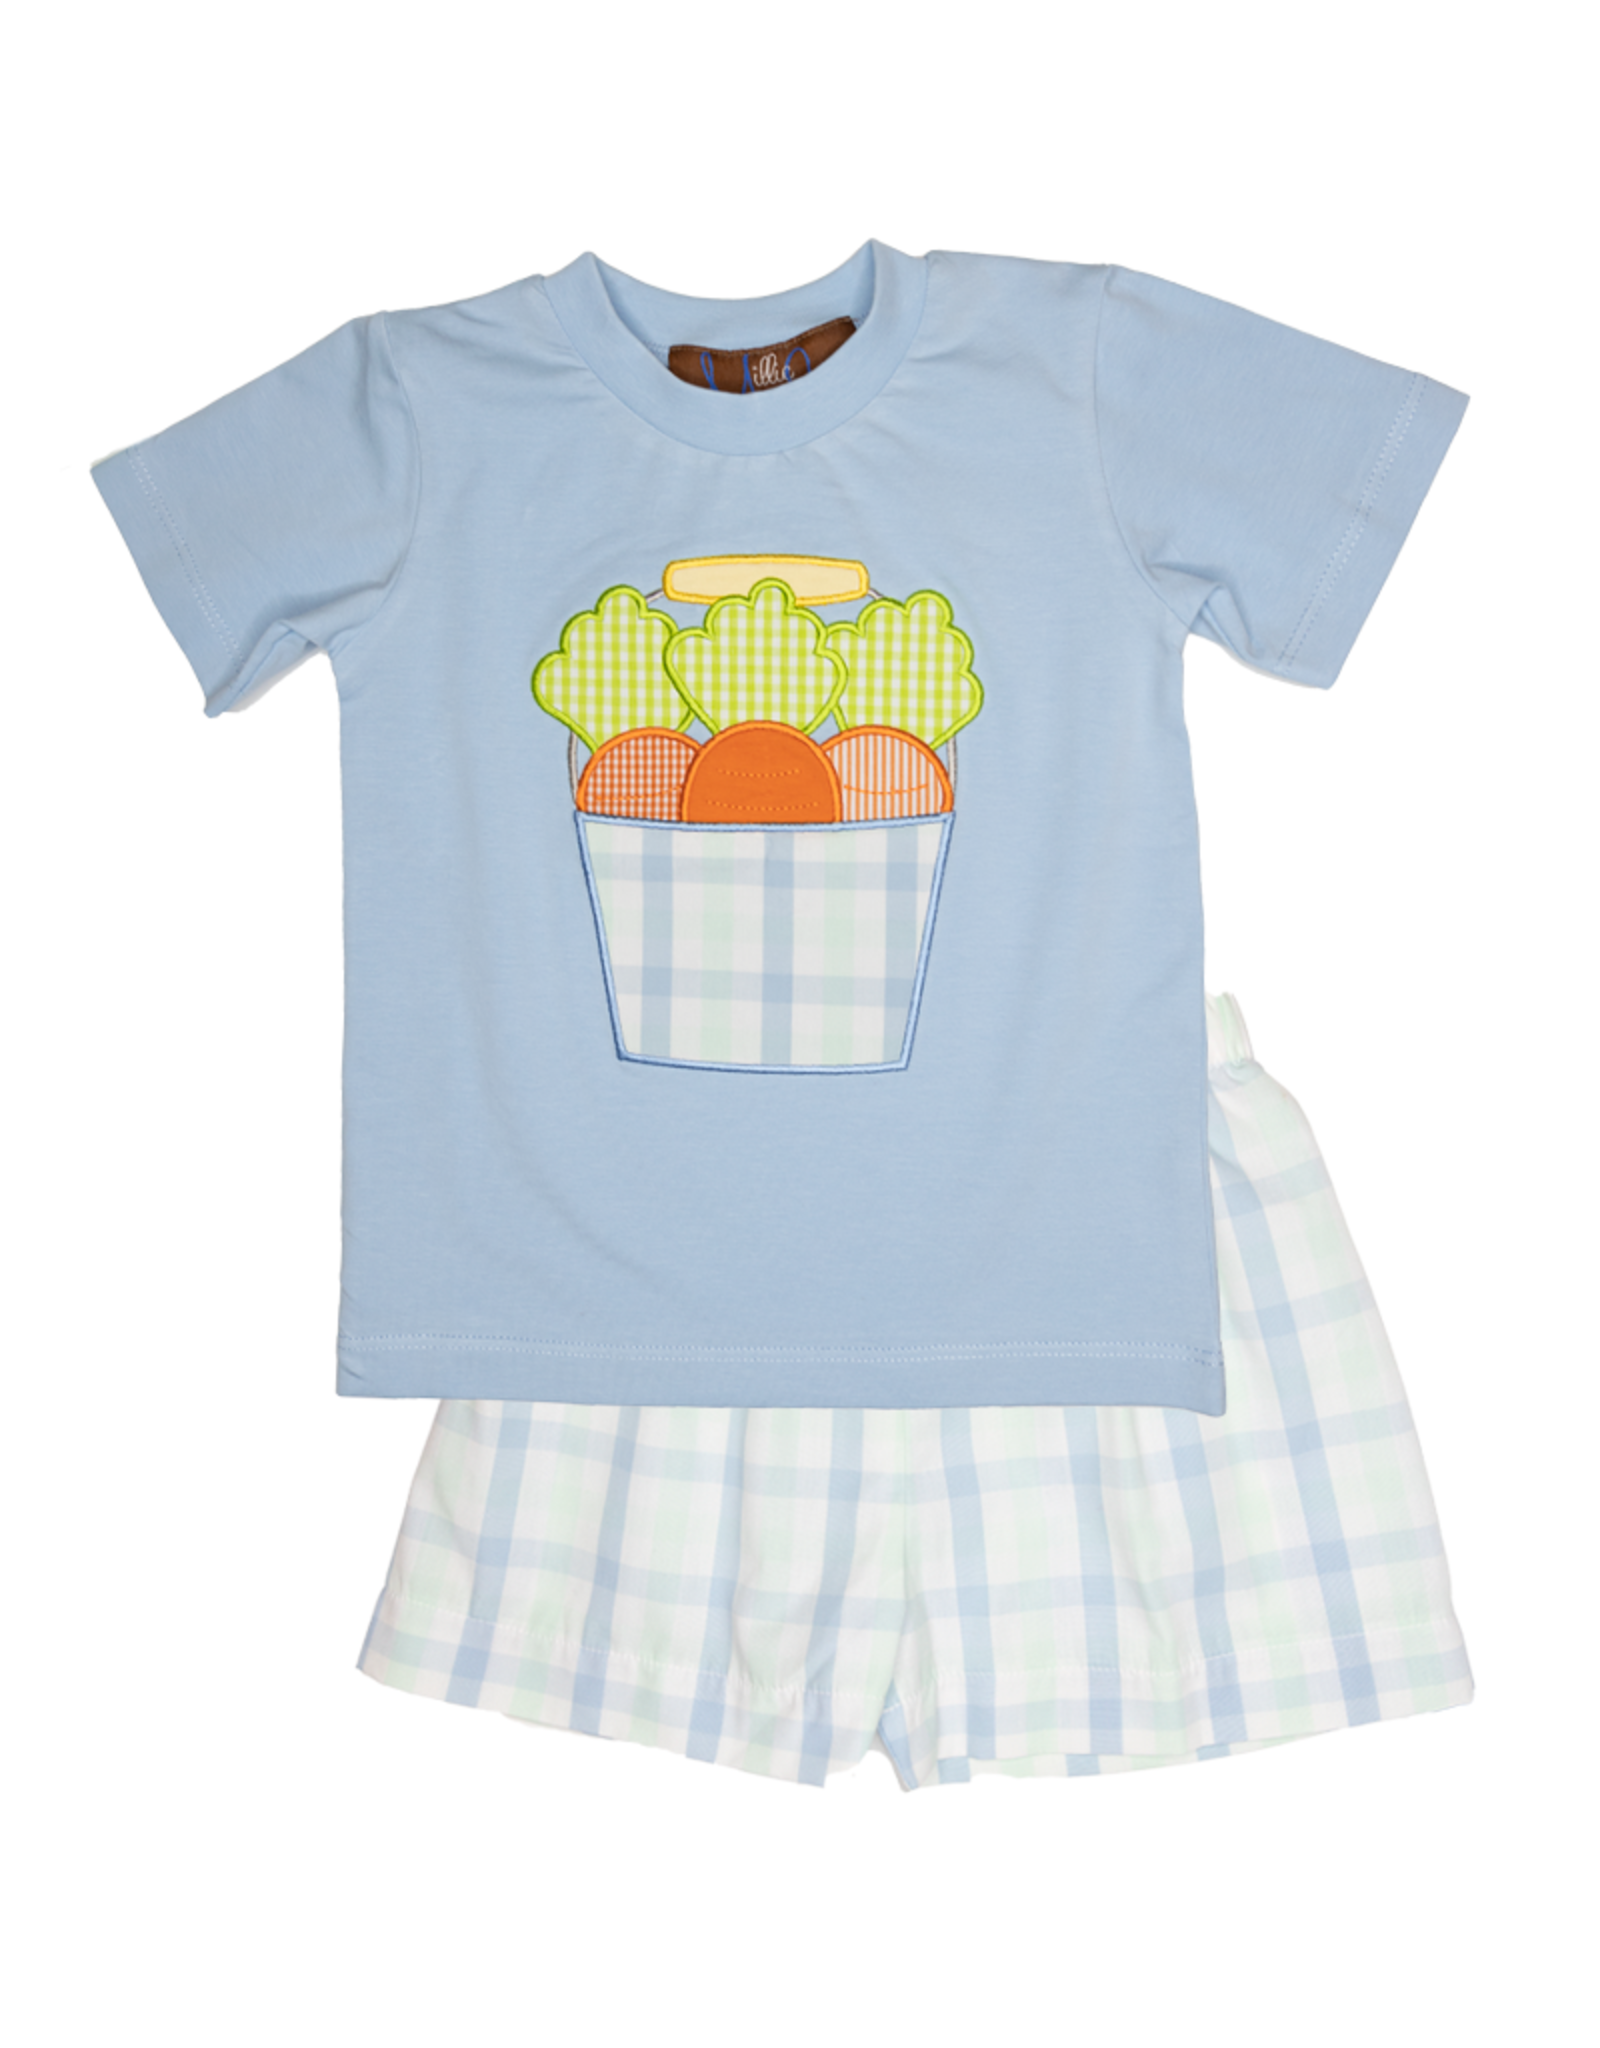 Millie Jay 509 Easter Pail Shirt